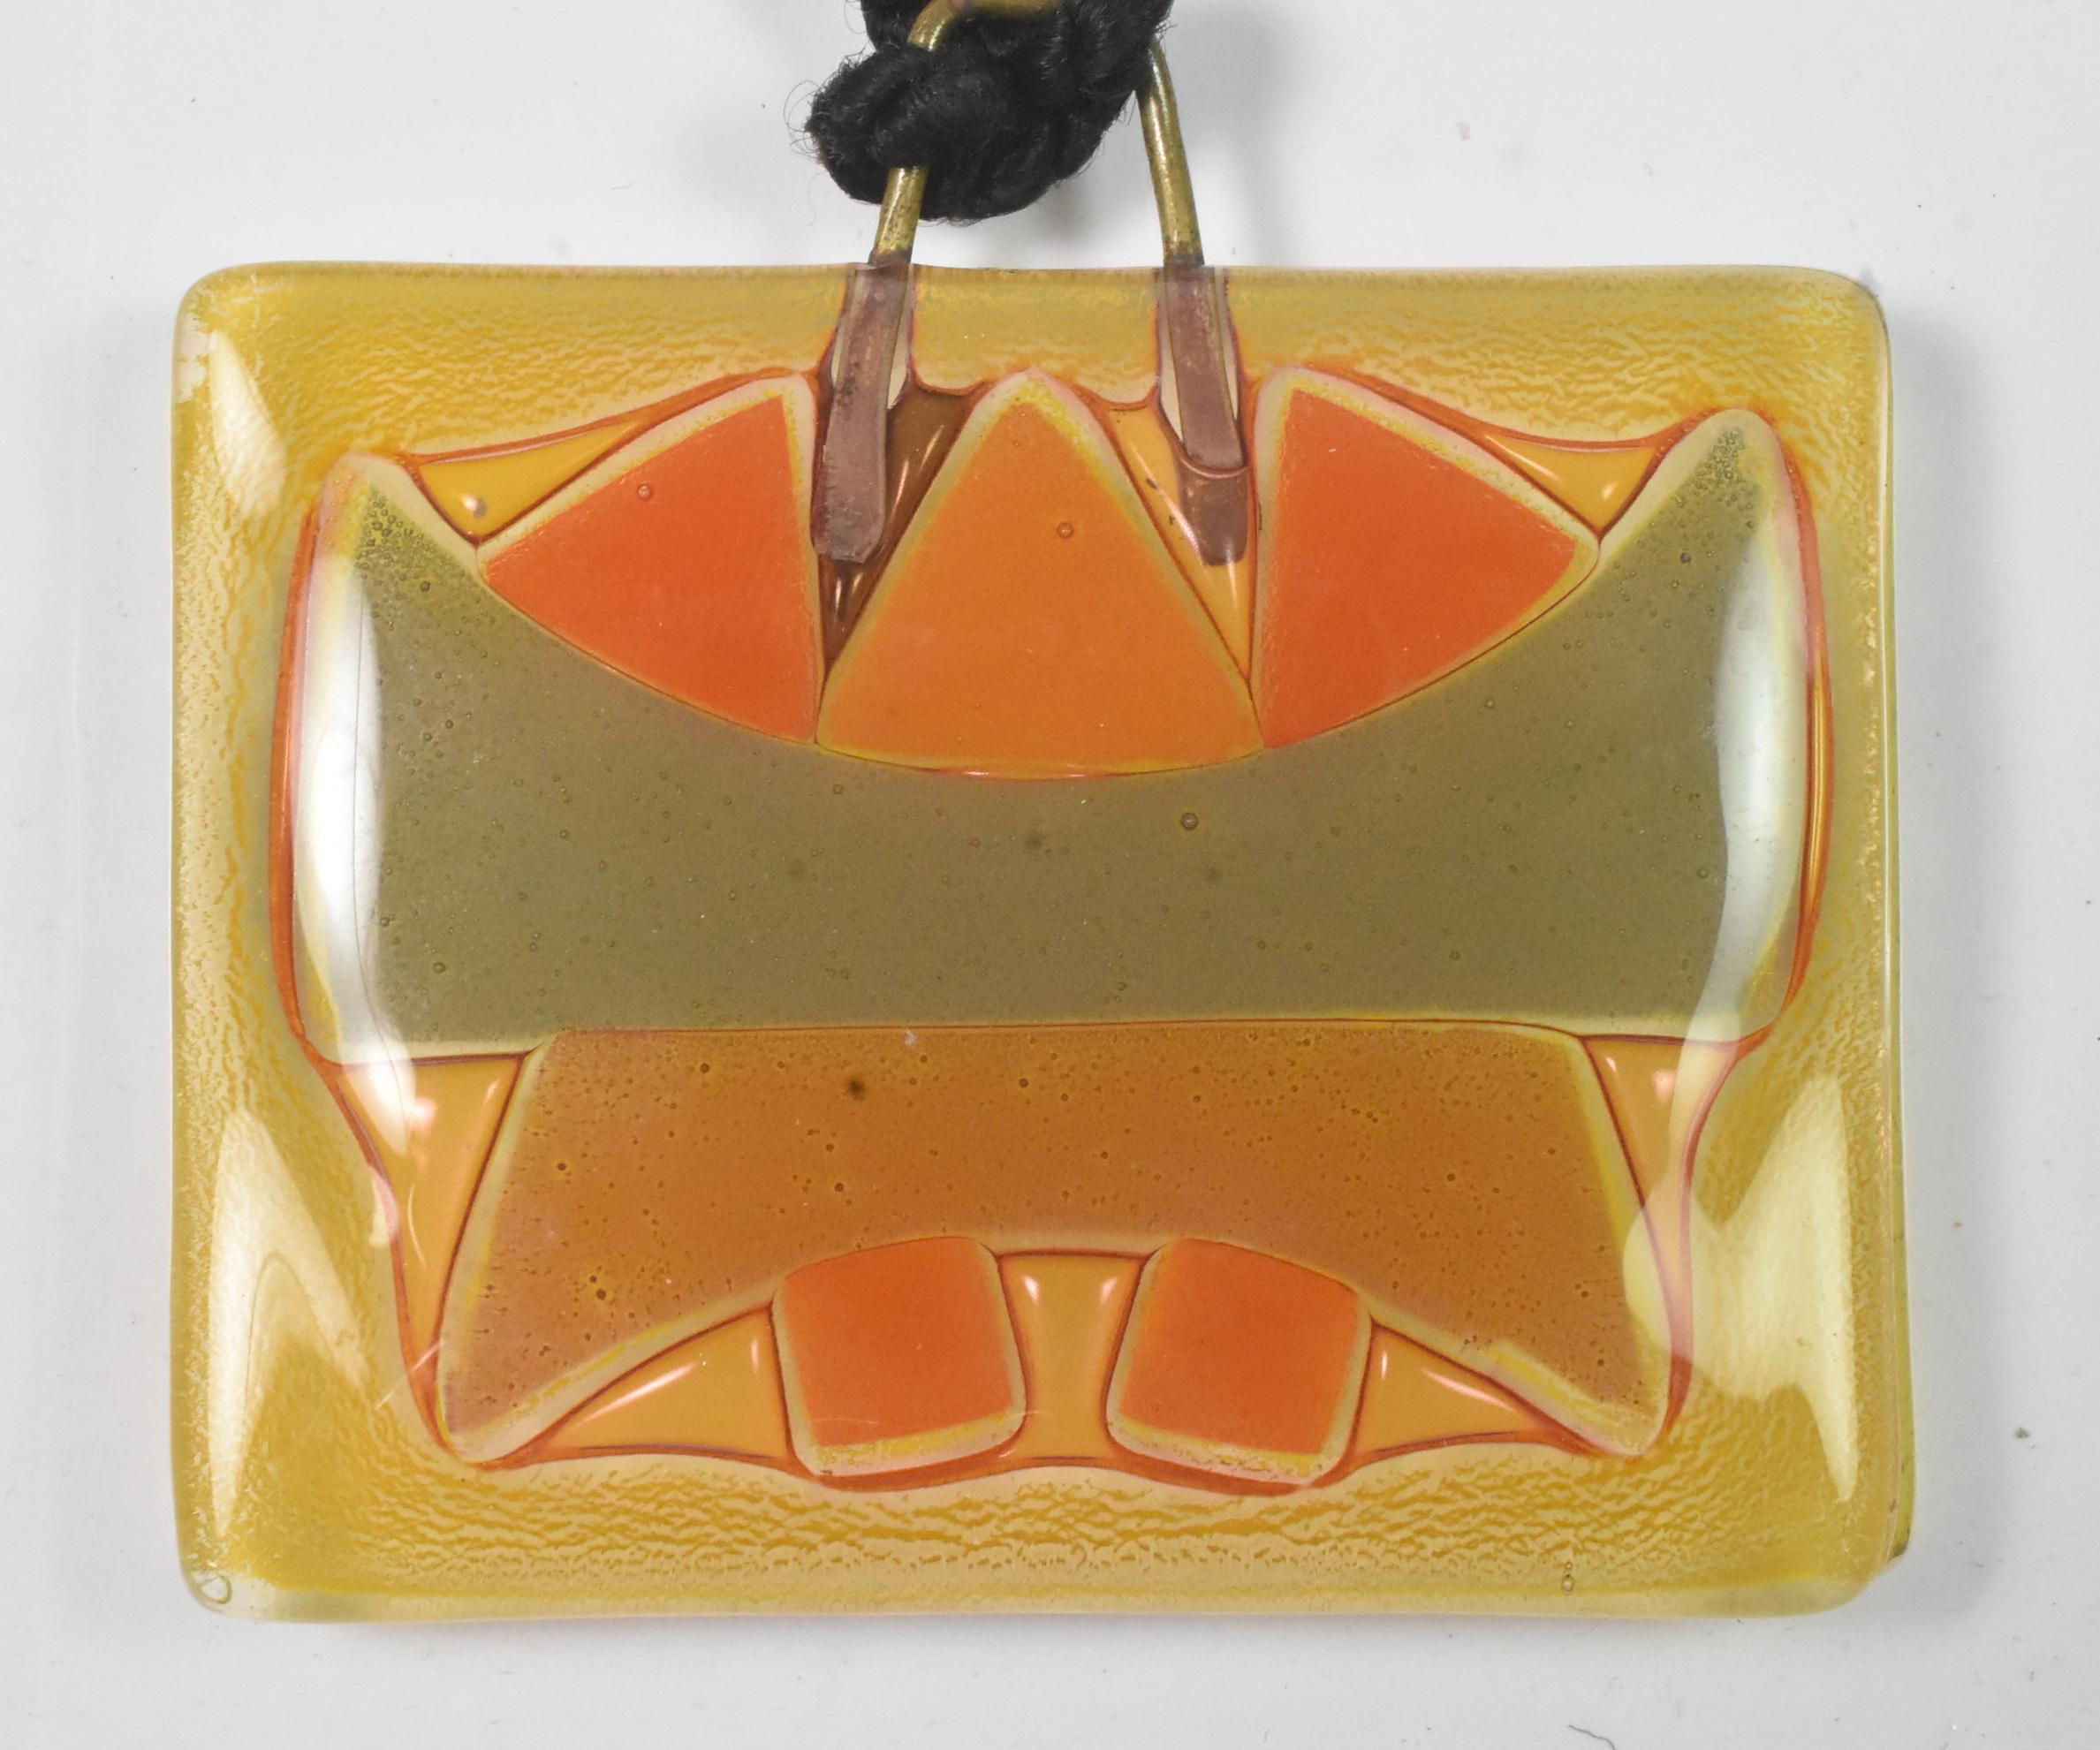 Vintage 1960s Michael & Frances Higgins American Modernist Fused Glass Pendant. Handmade glass pendant made up of yellow, orange, gold, and gray colors on a 25